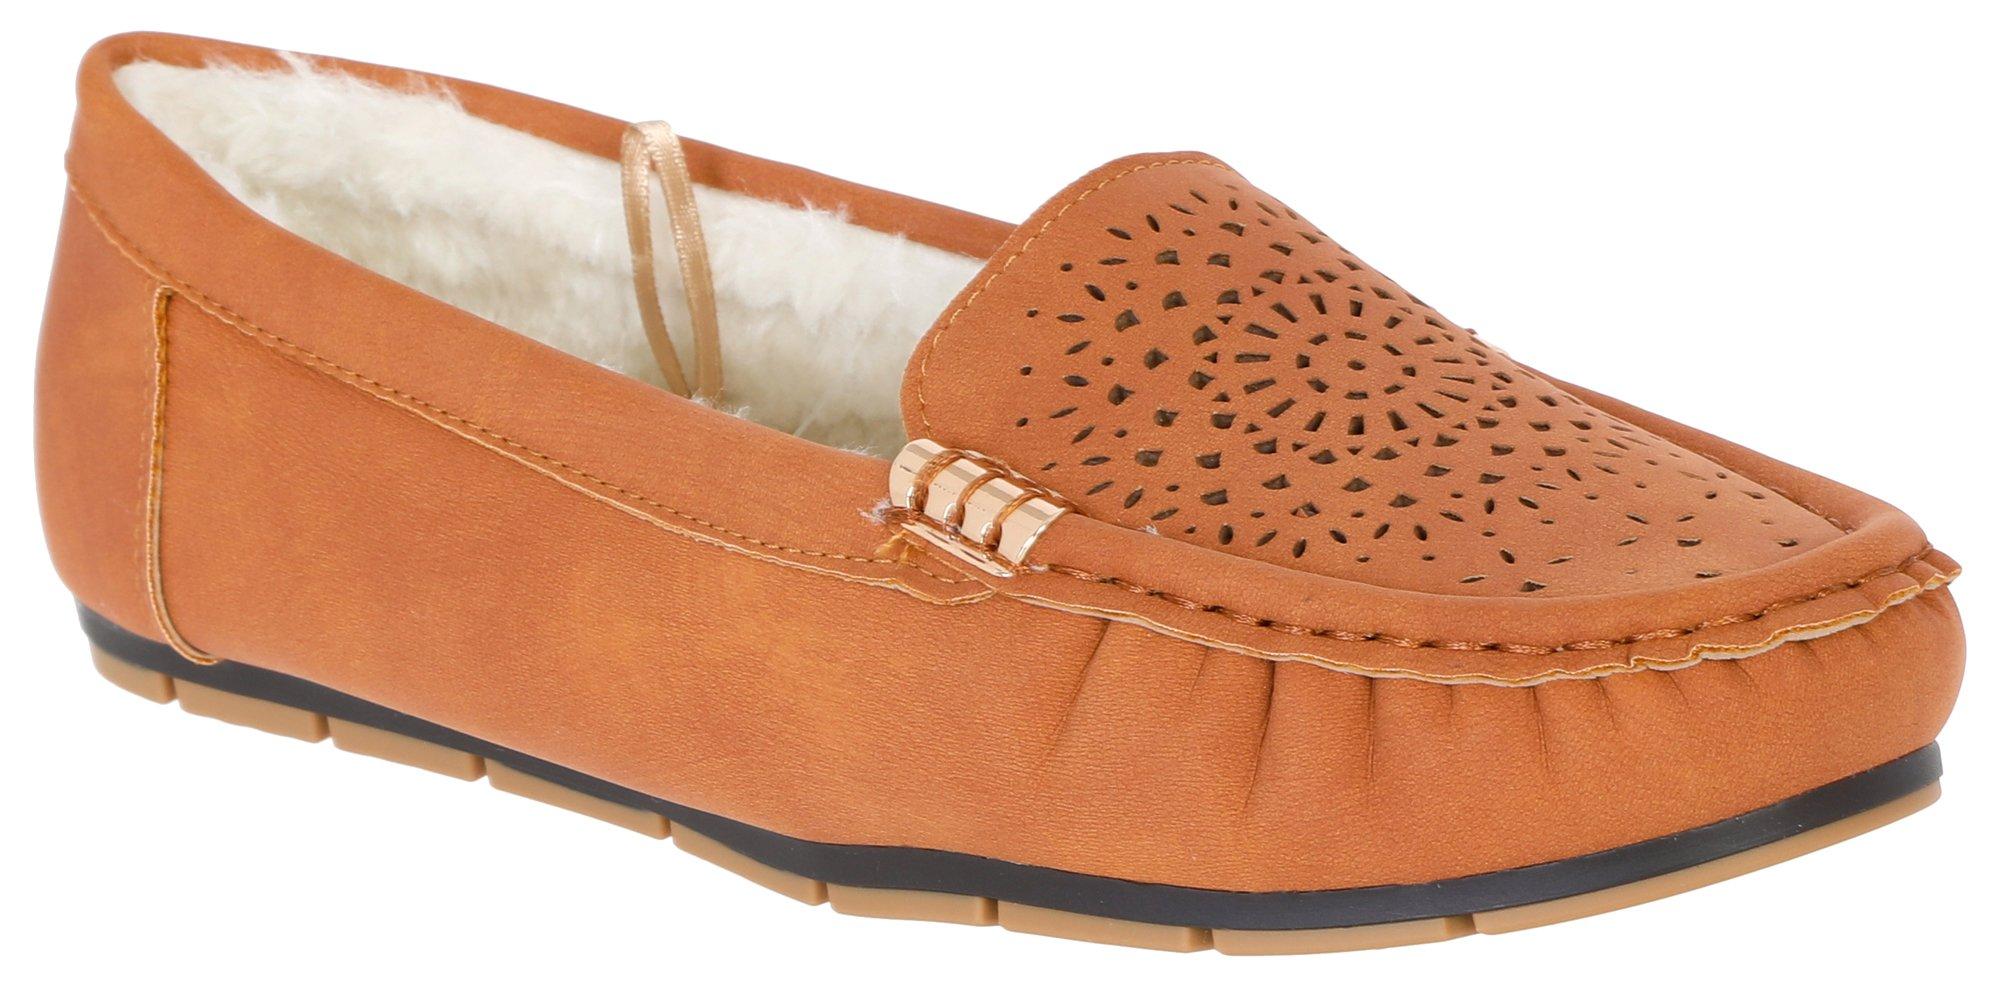 Women's Faux Leather & Fur Lined Moccasins